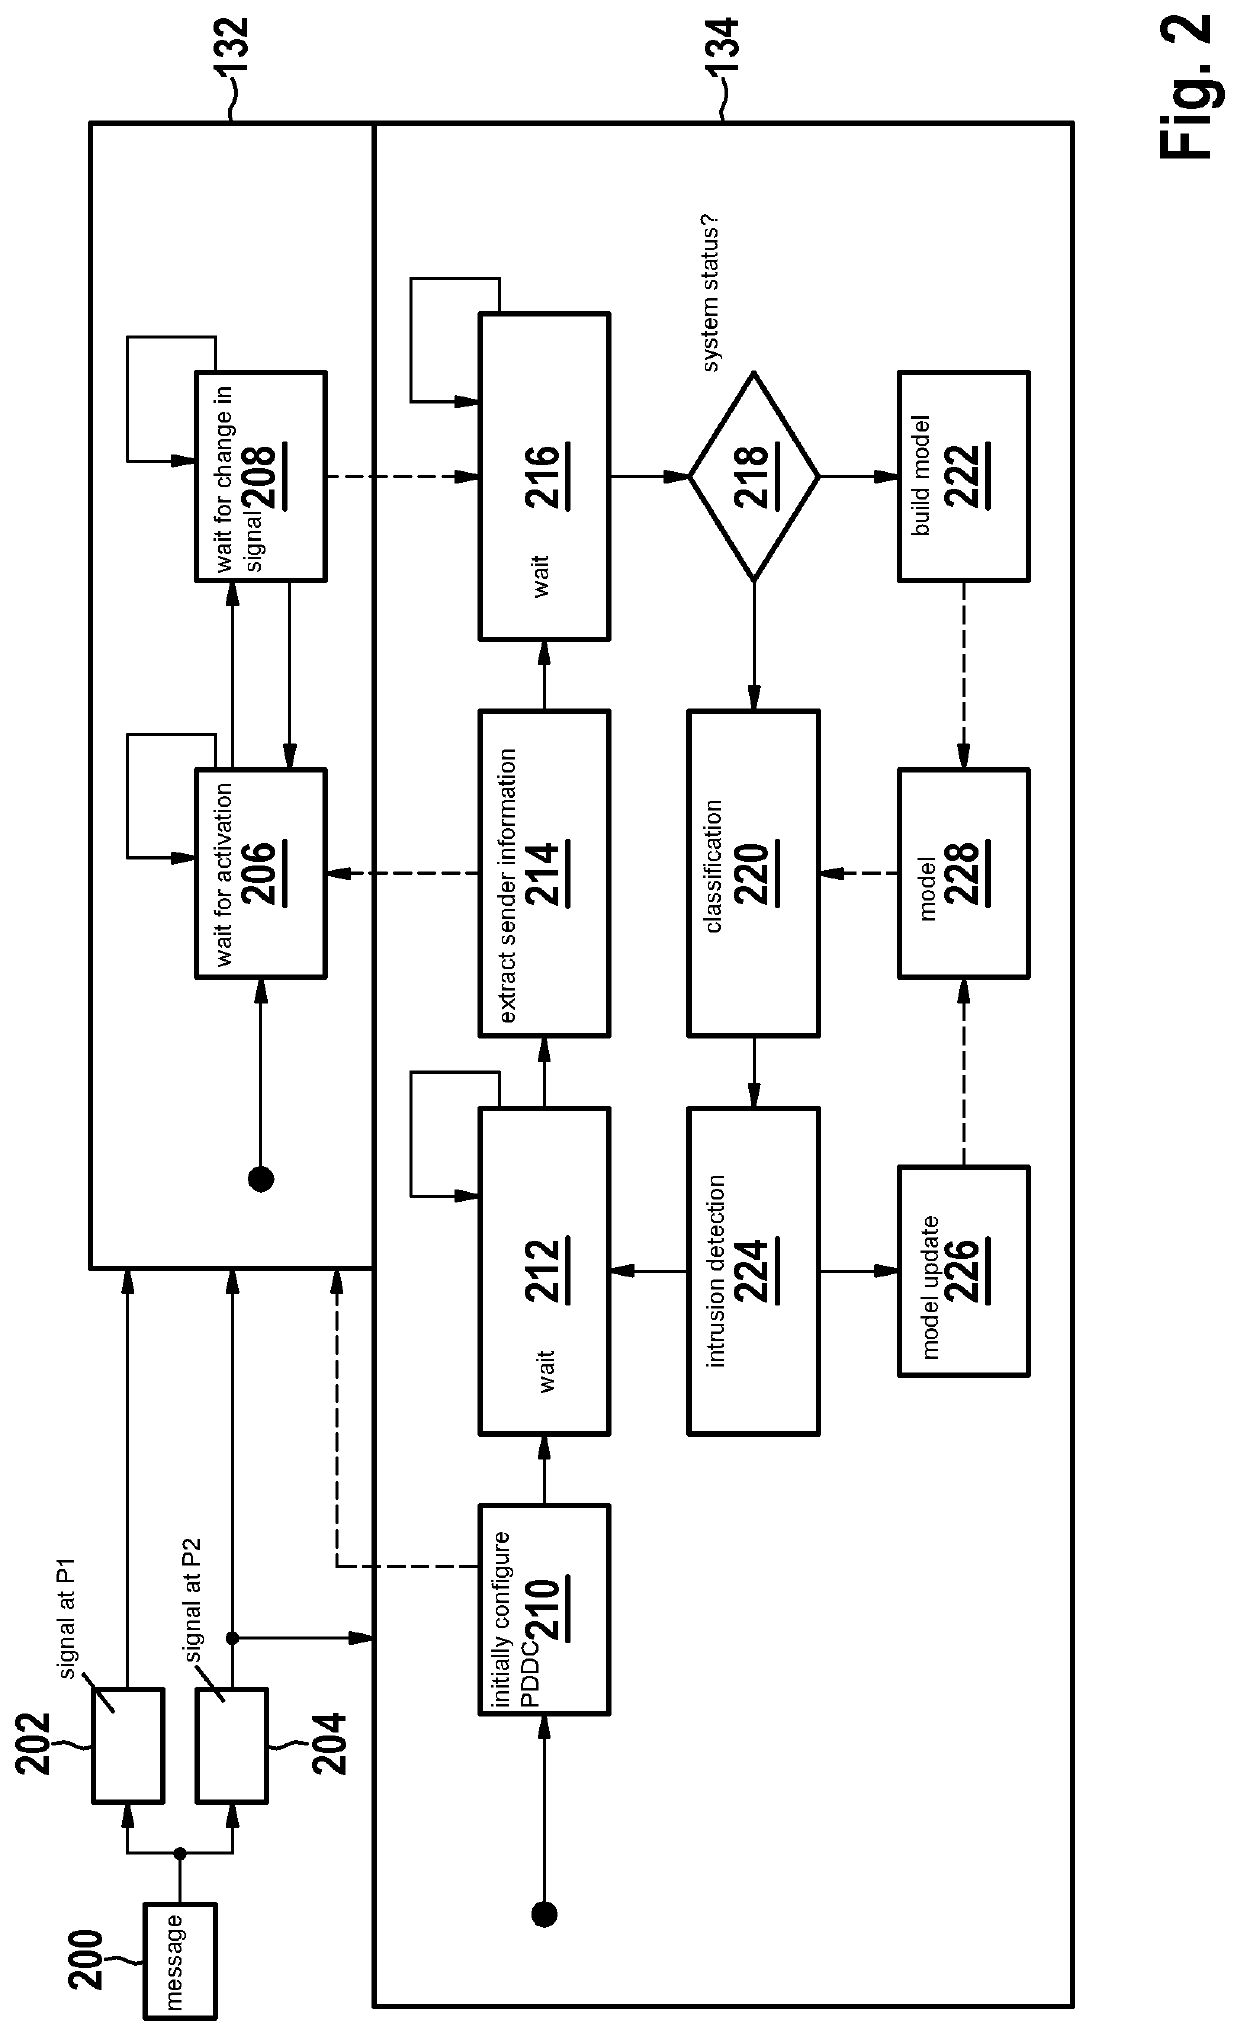 Method for checking a message in a communication system